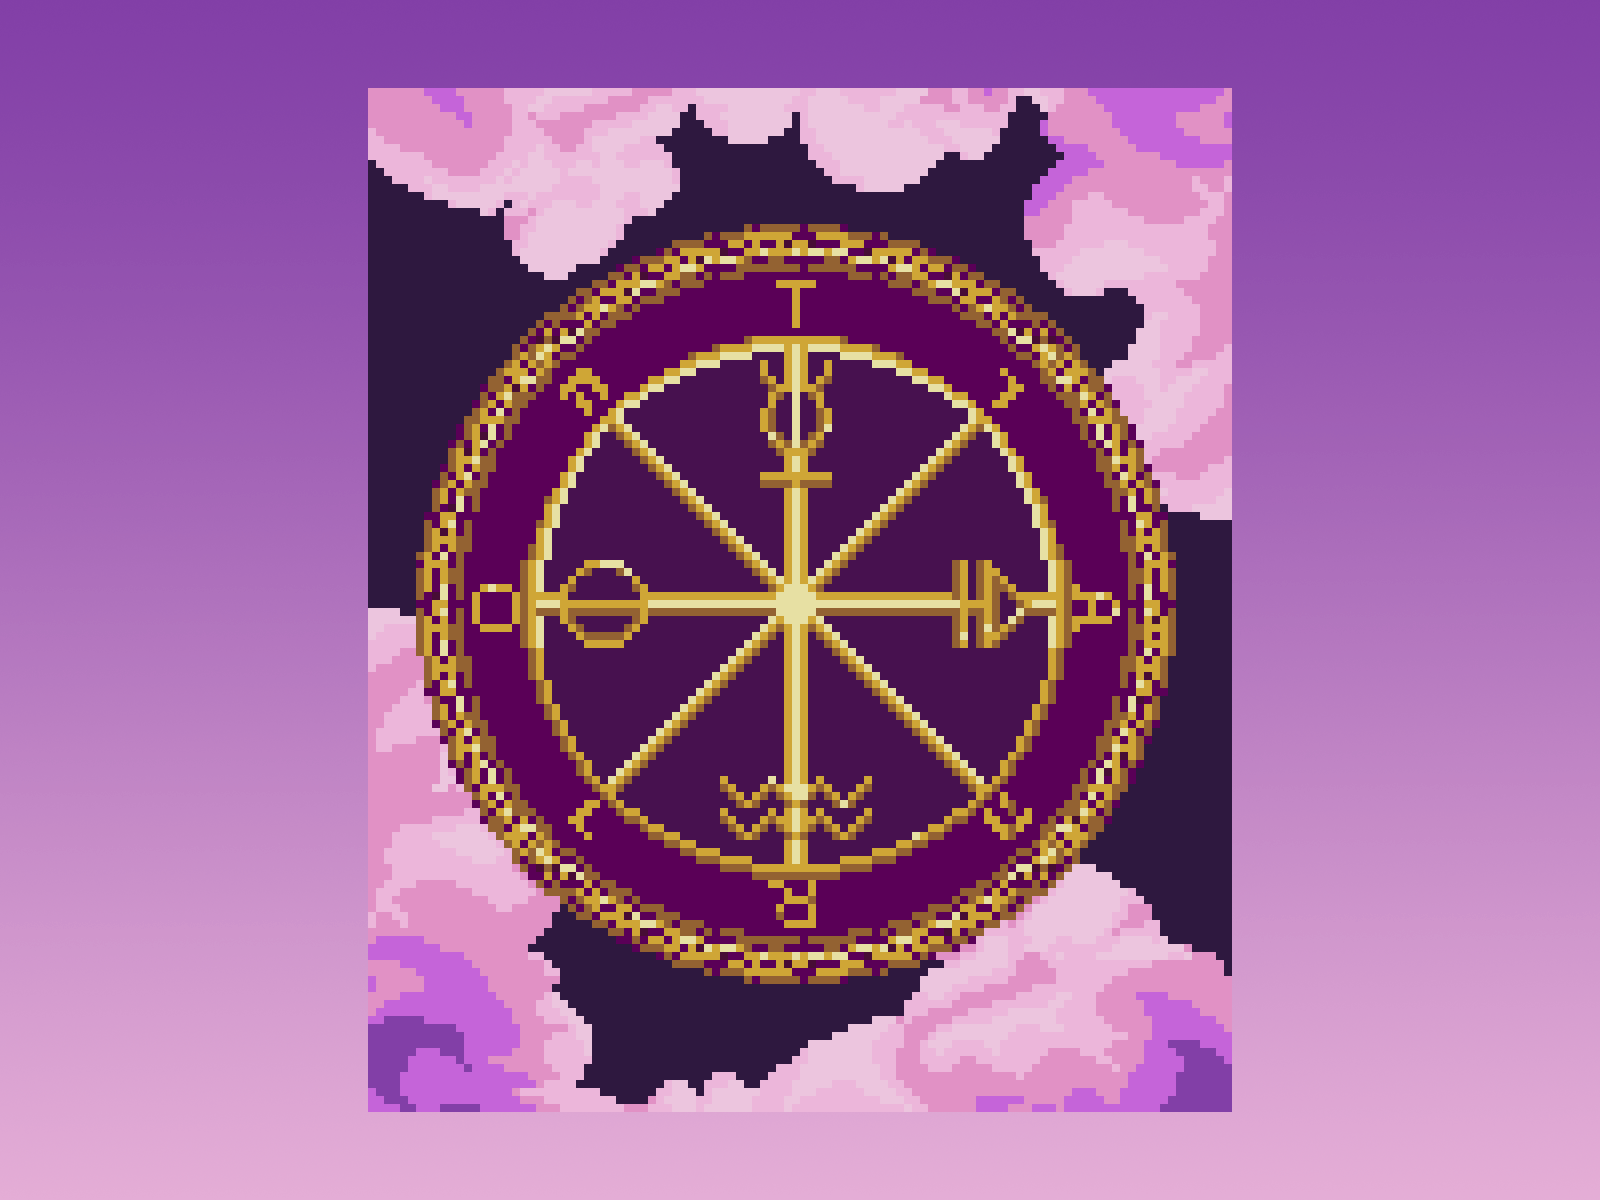 Metalabel Releases element 16bit ancient circle cryptic crypto game design gif gold illustration magical metalabel motion graphics mystic pastelle pixel art pixelart sky tarot wheel of fortune wheeloffortune